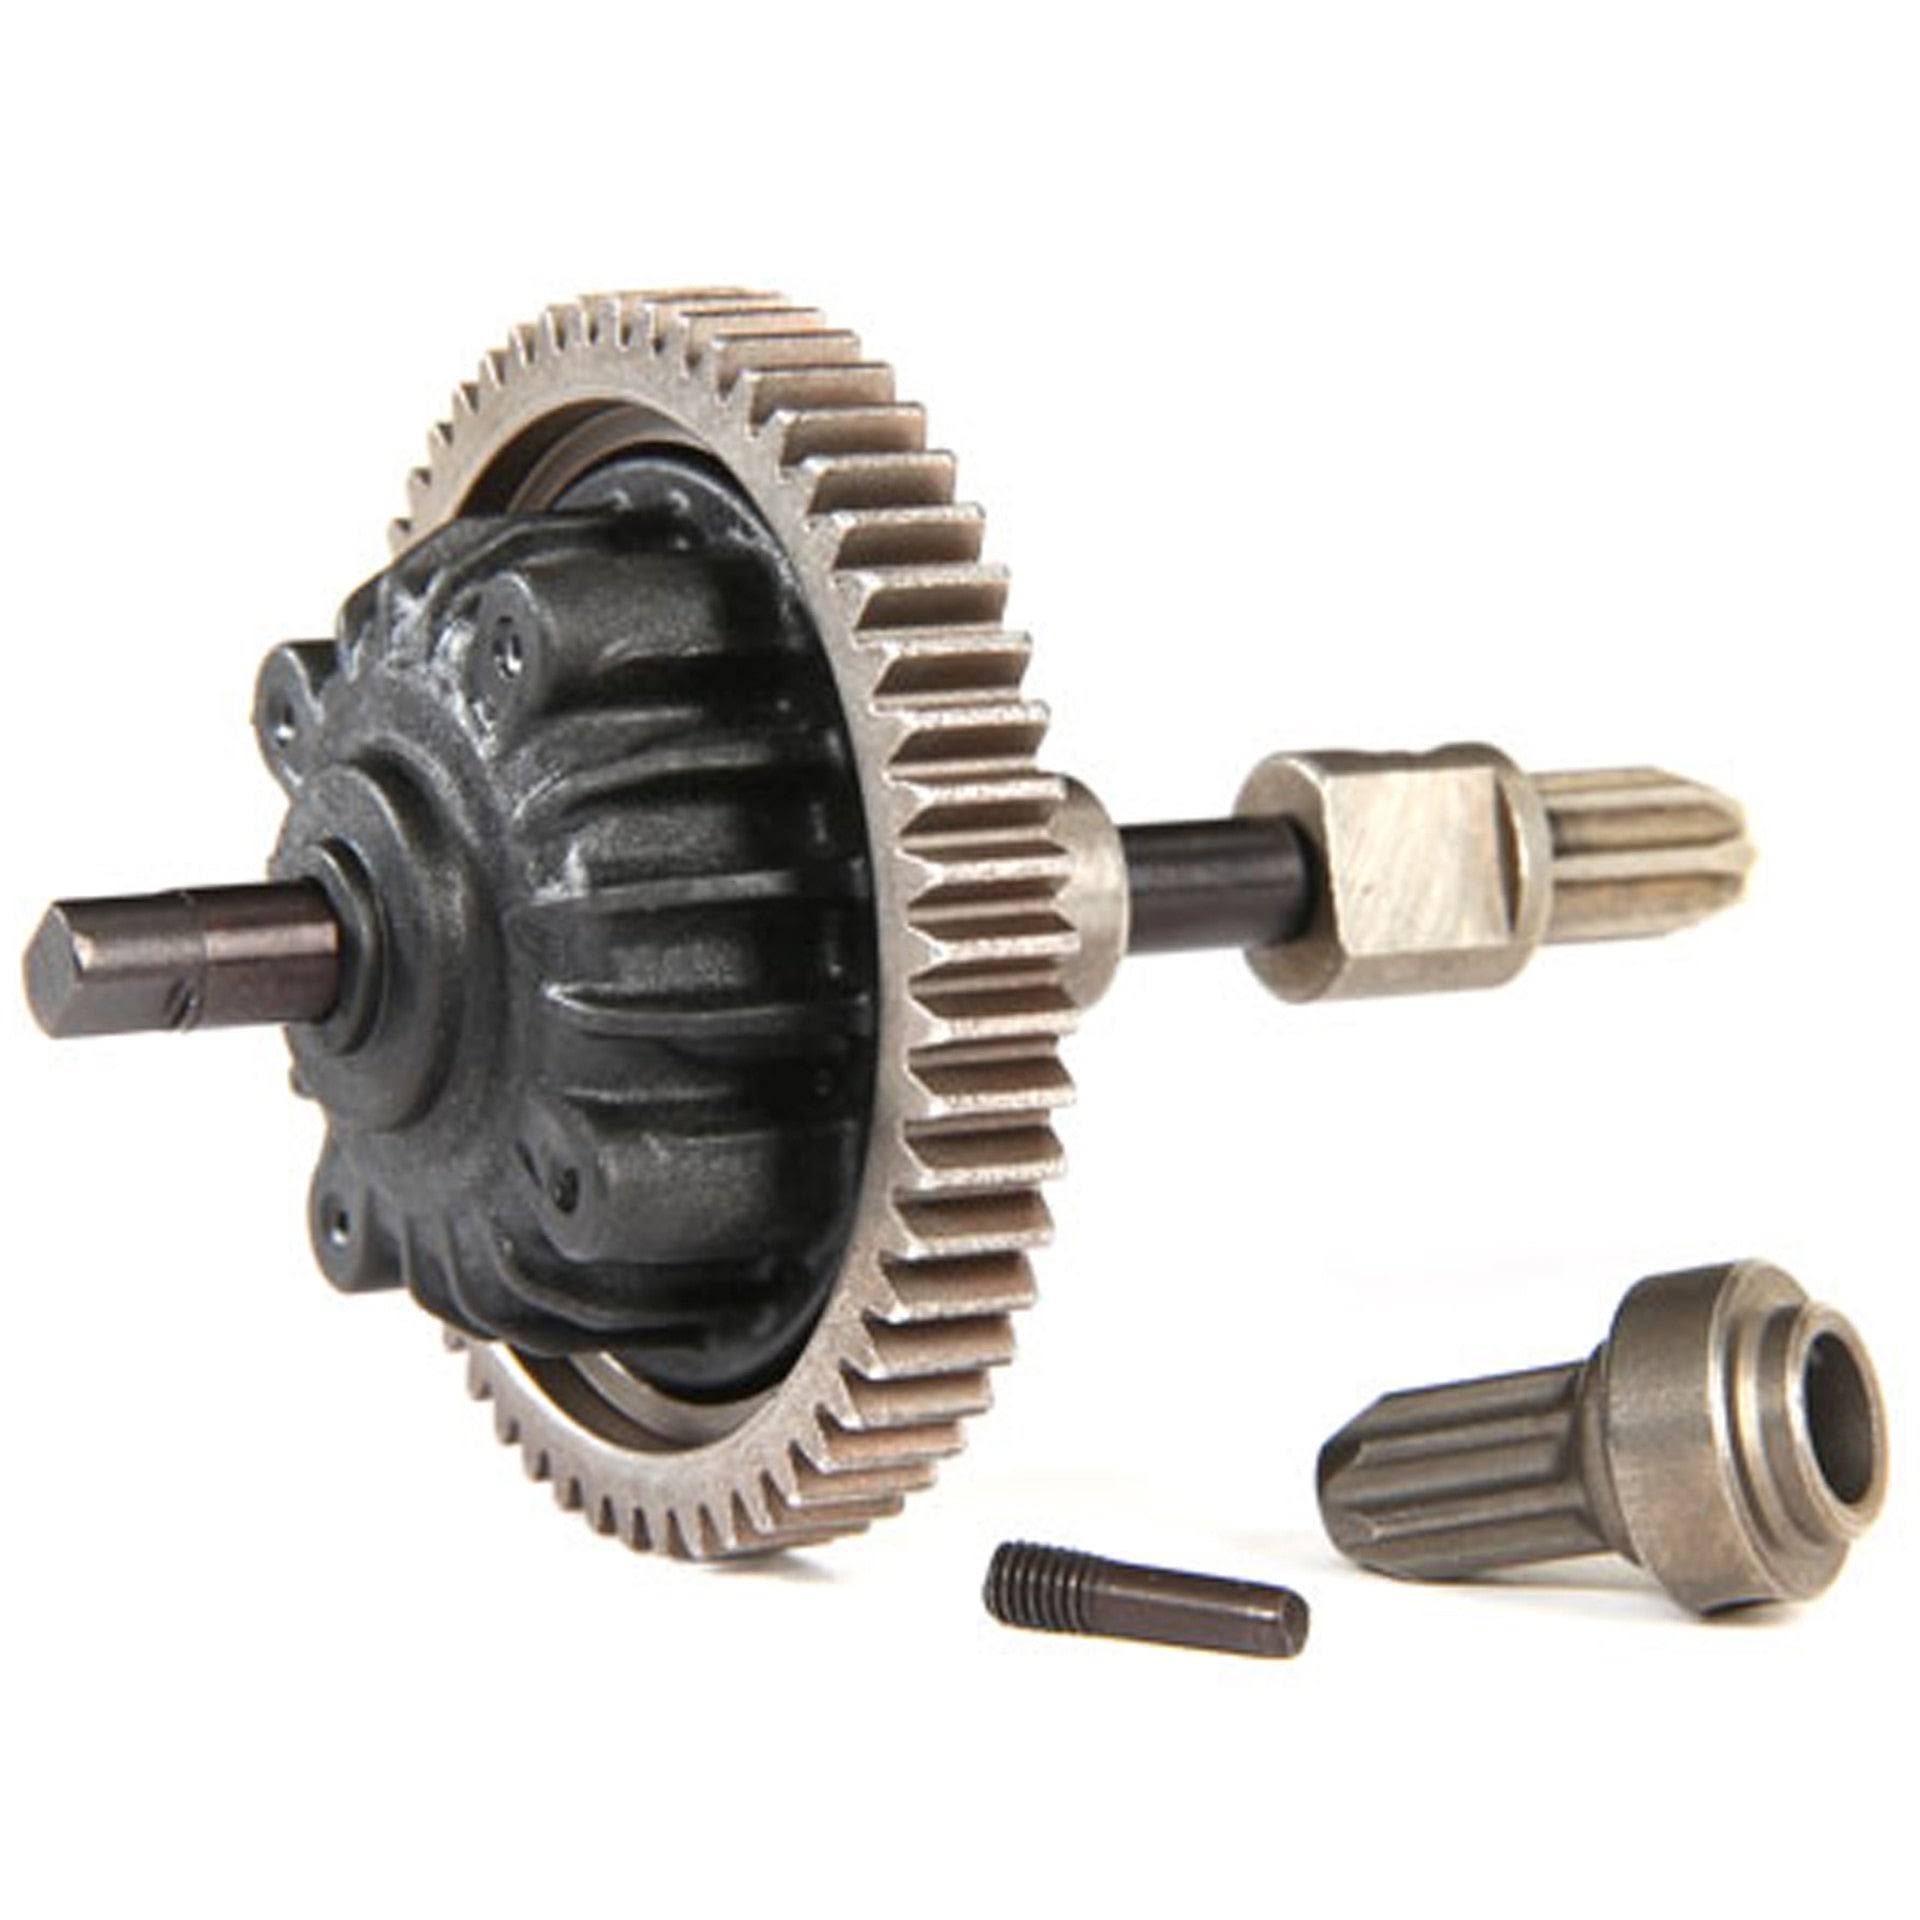 Traxxas Hoss Complete Center Differential 6780A